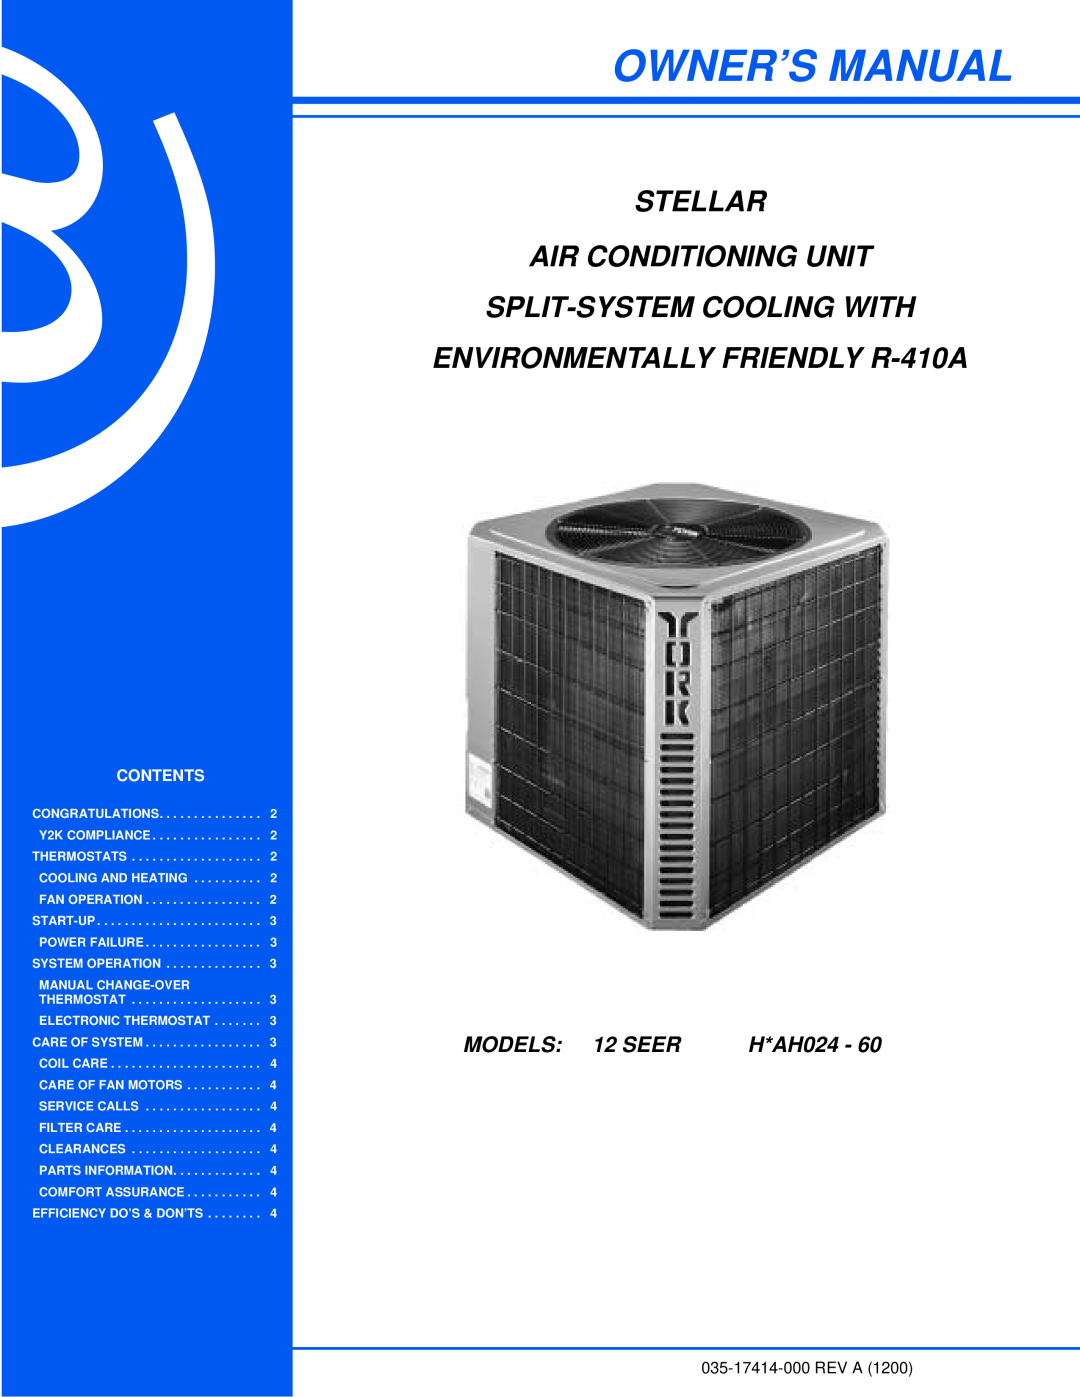 York 12 SEER H*AH024 - 60 owner manual Stellar Air Conditioning Unit, Split-Systemcooling With, MODELS 12 SEER, Contents 